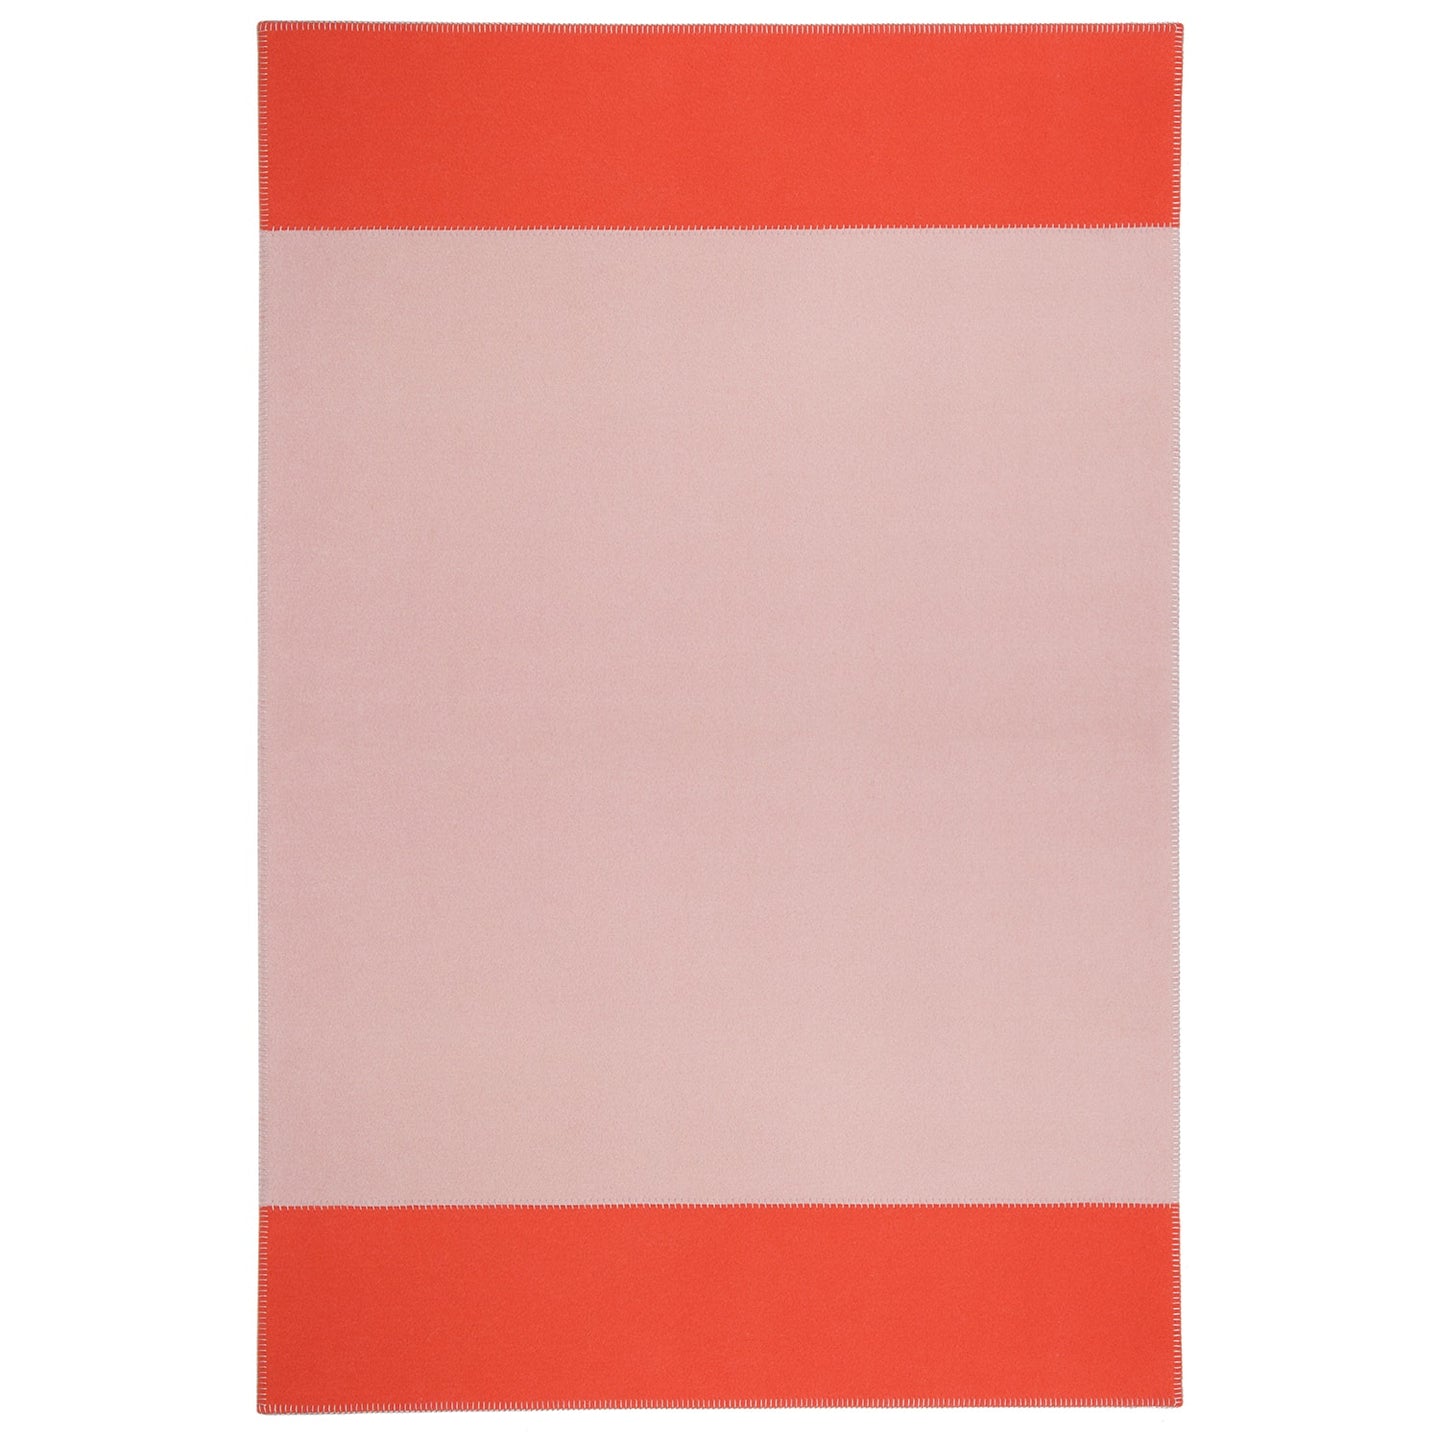 Hugh Tapis Rug, Blush & Coral rug by Roger Oates for AUTHOR's collection of British-made luxury homeware